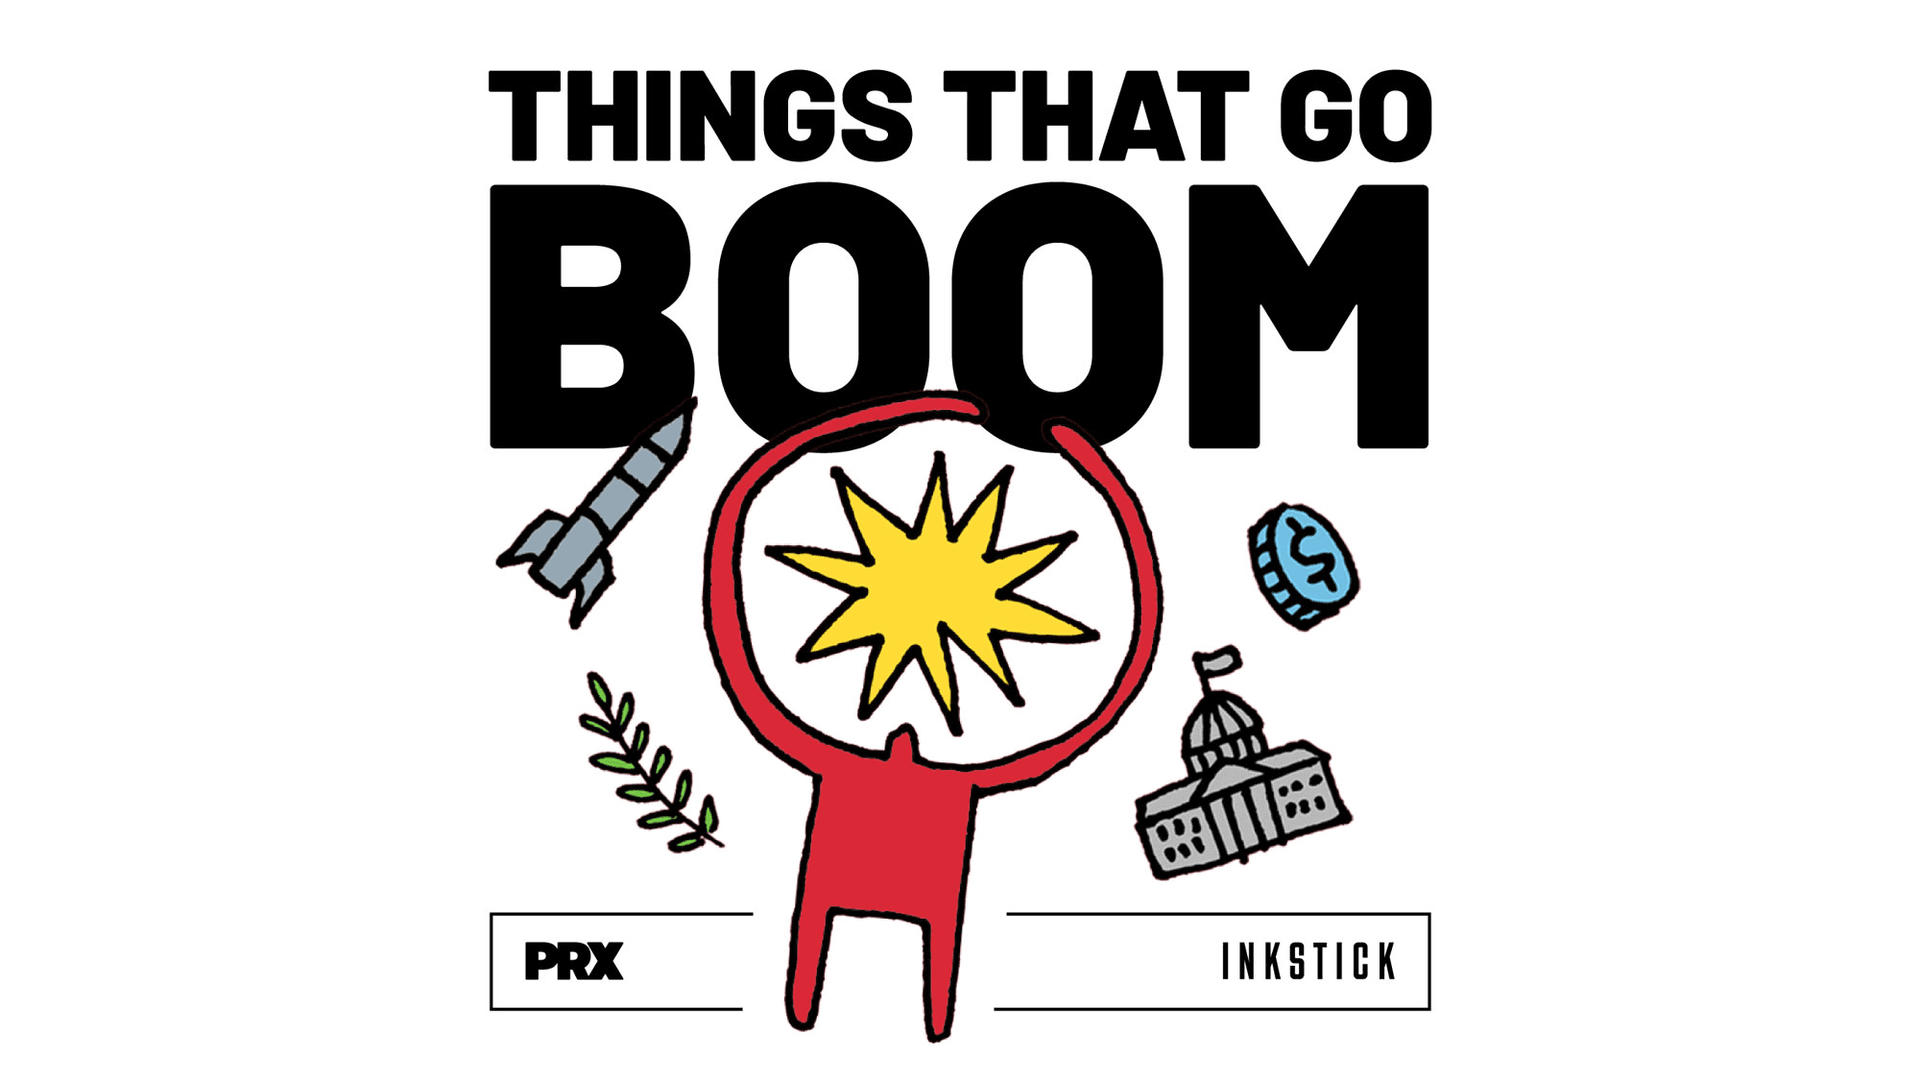 Things That Go Boom Season 3 logo with an illustration that includes a magnifying glass, a rocket, a coin, and the US Capitol building.